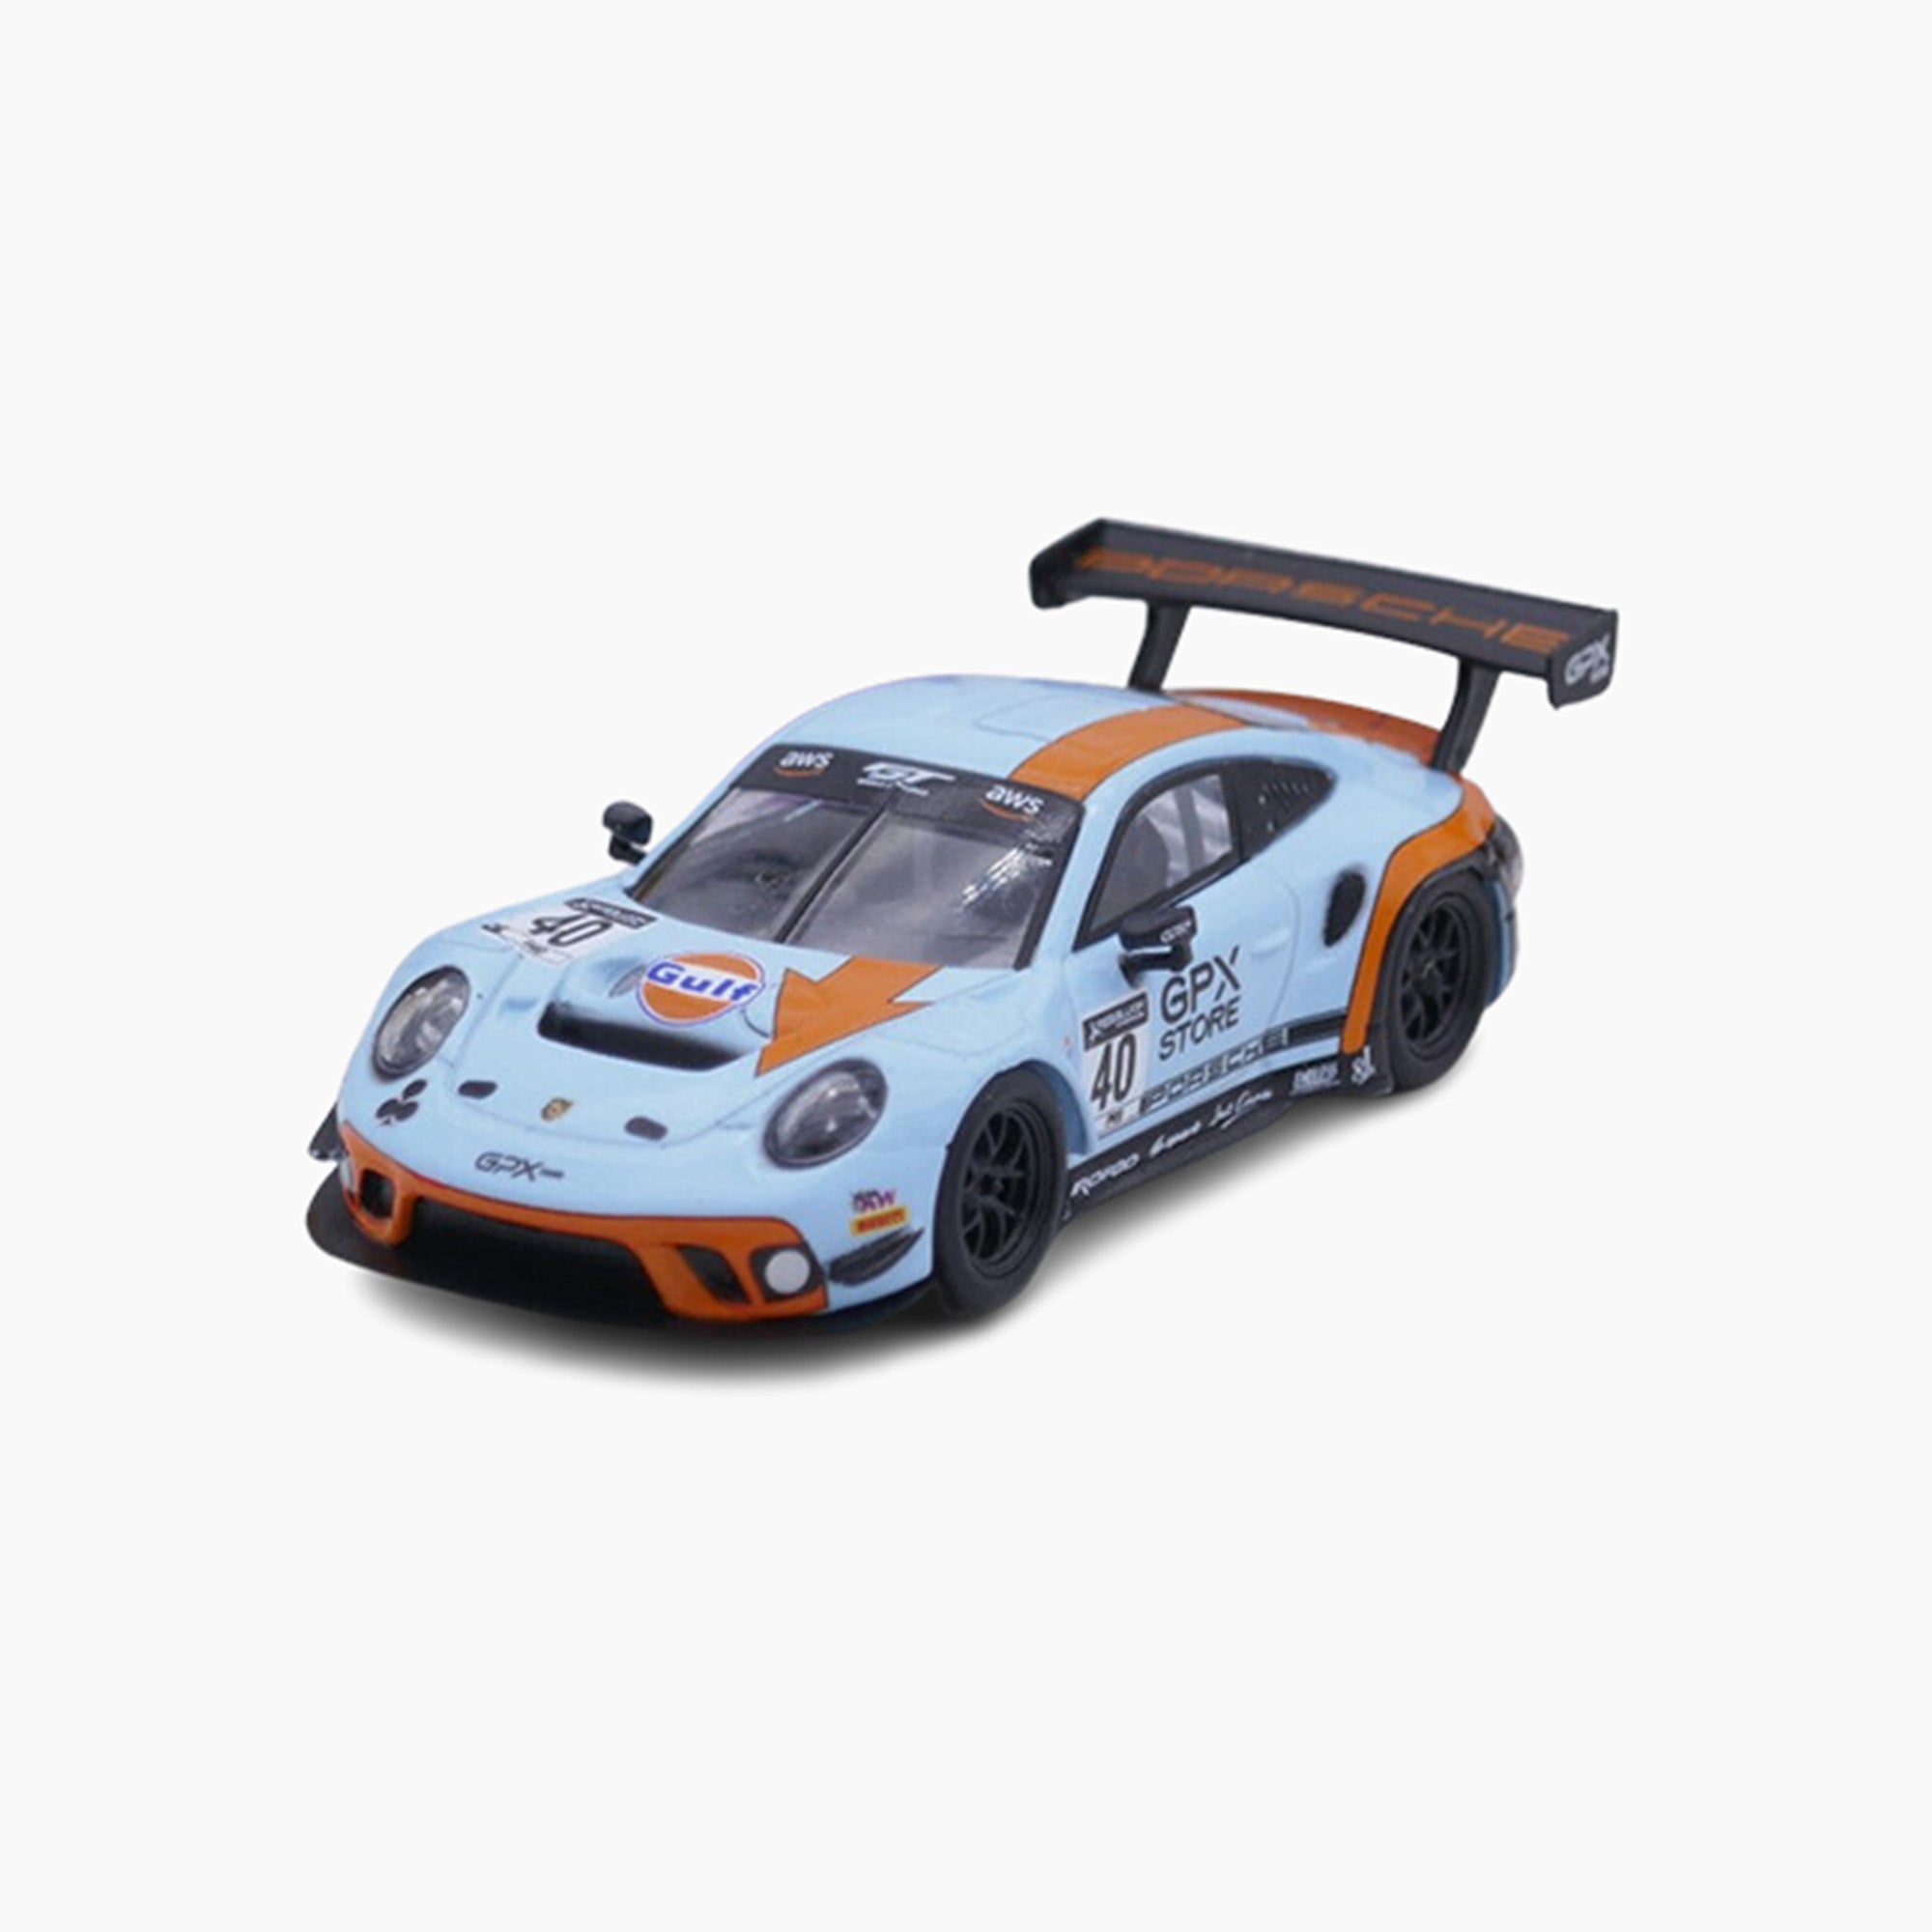 Porsche GT3 R GPX Racing No.40 "The Club" | 1:64 Scale Model-1:64 Scale Model-Spark Models-gpx-store